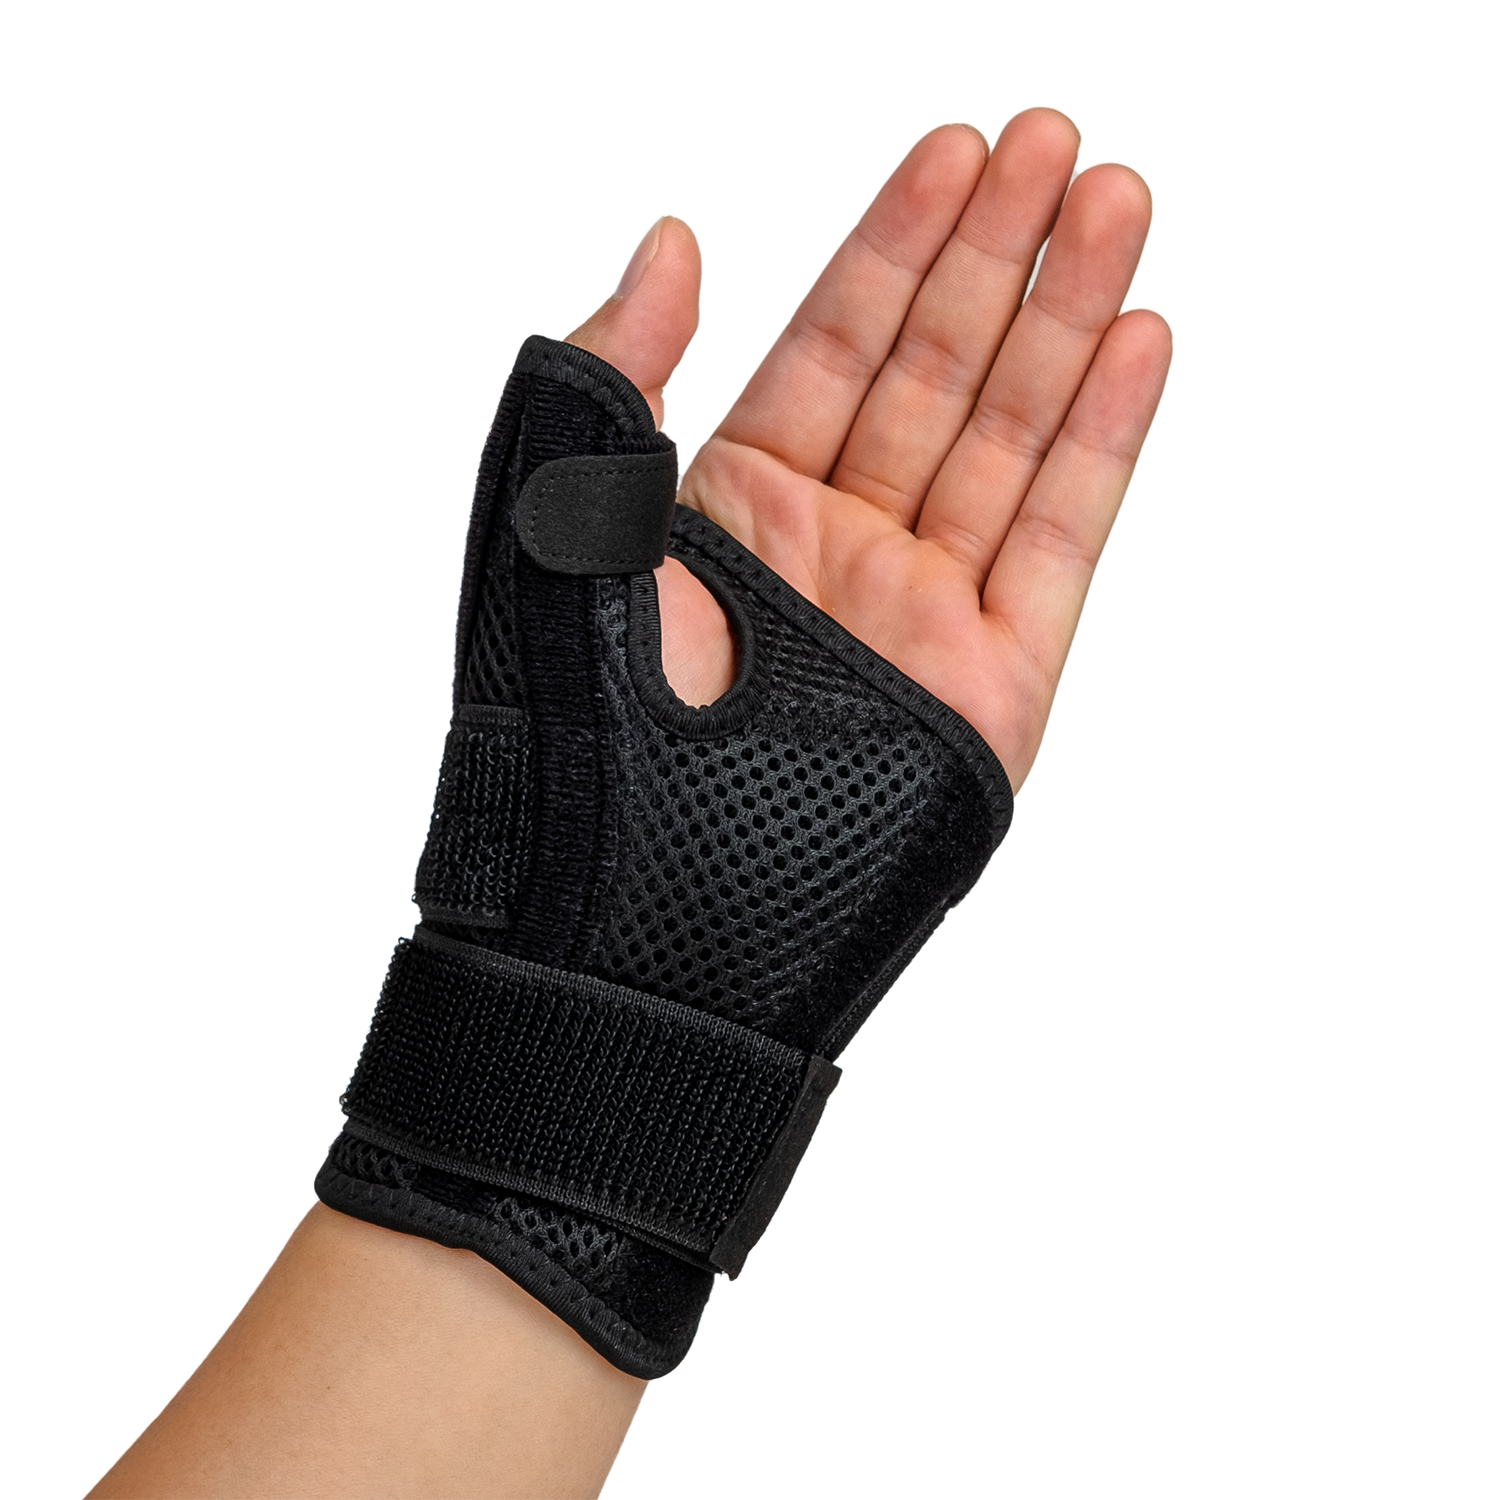 Apollo Wrist and Thumb Support Brace - Black (one size fits all)